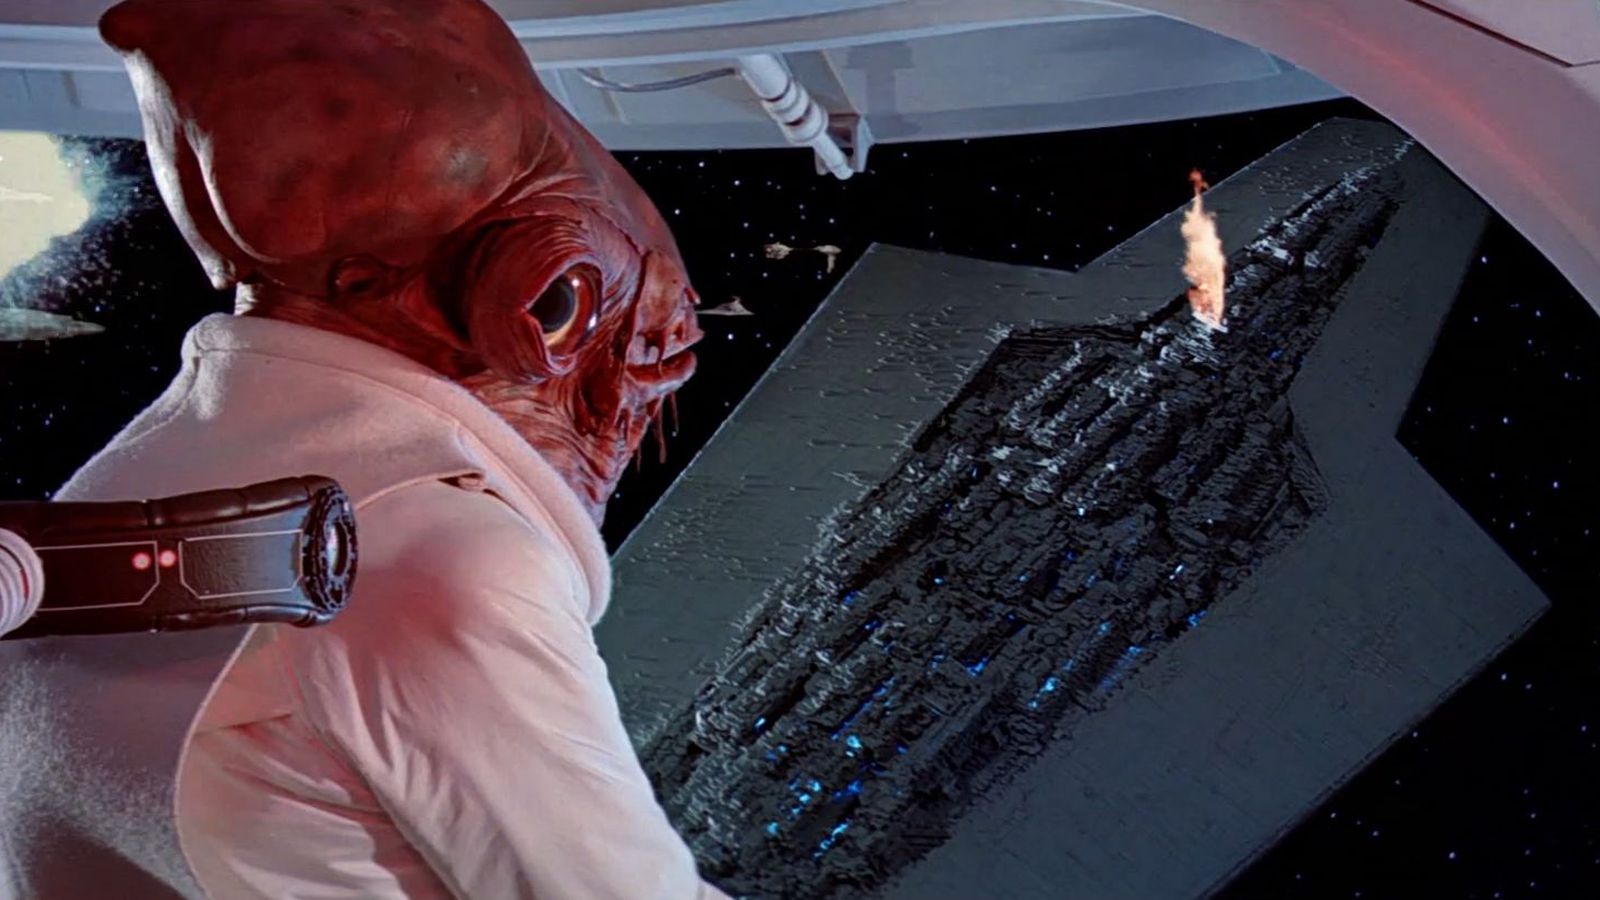 The biggest Star Wars spaceship casts a shadow the size of Manhattan - The Verge